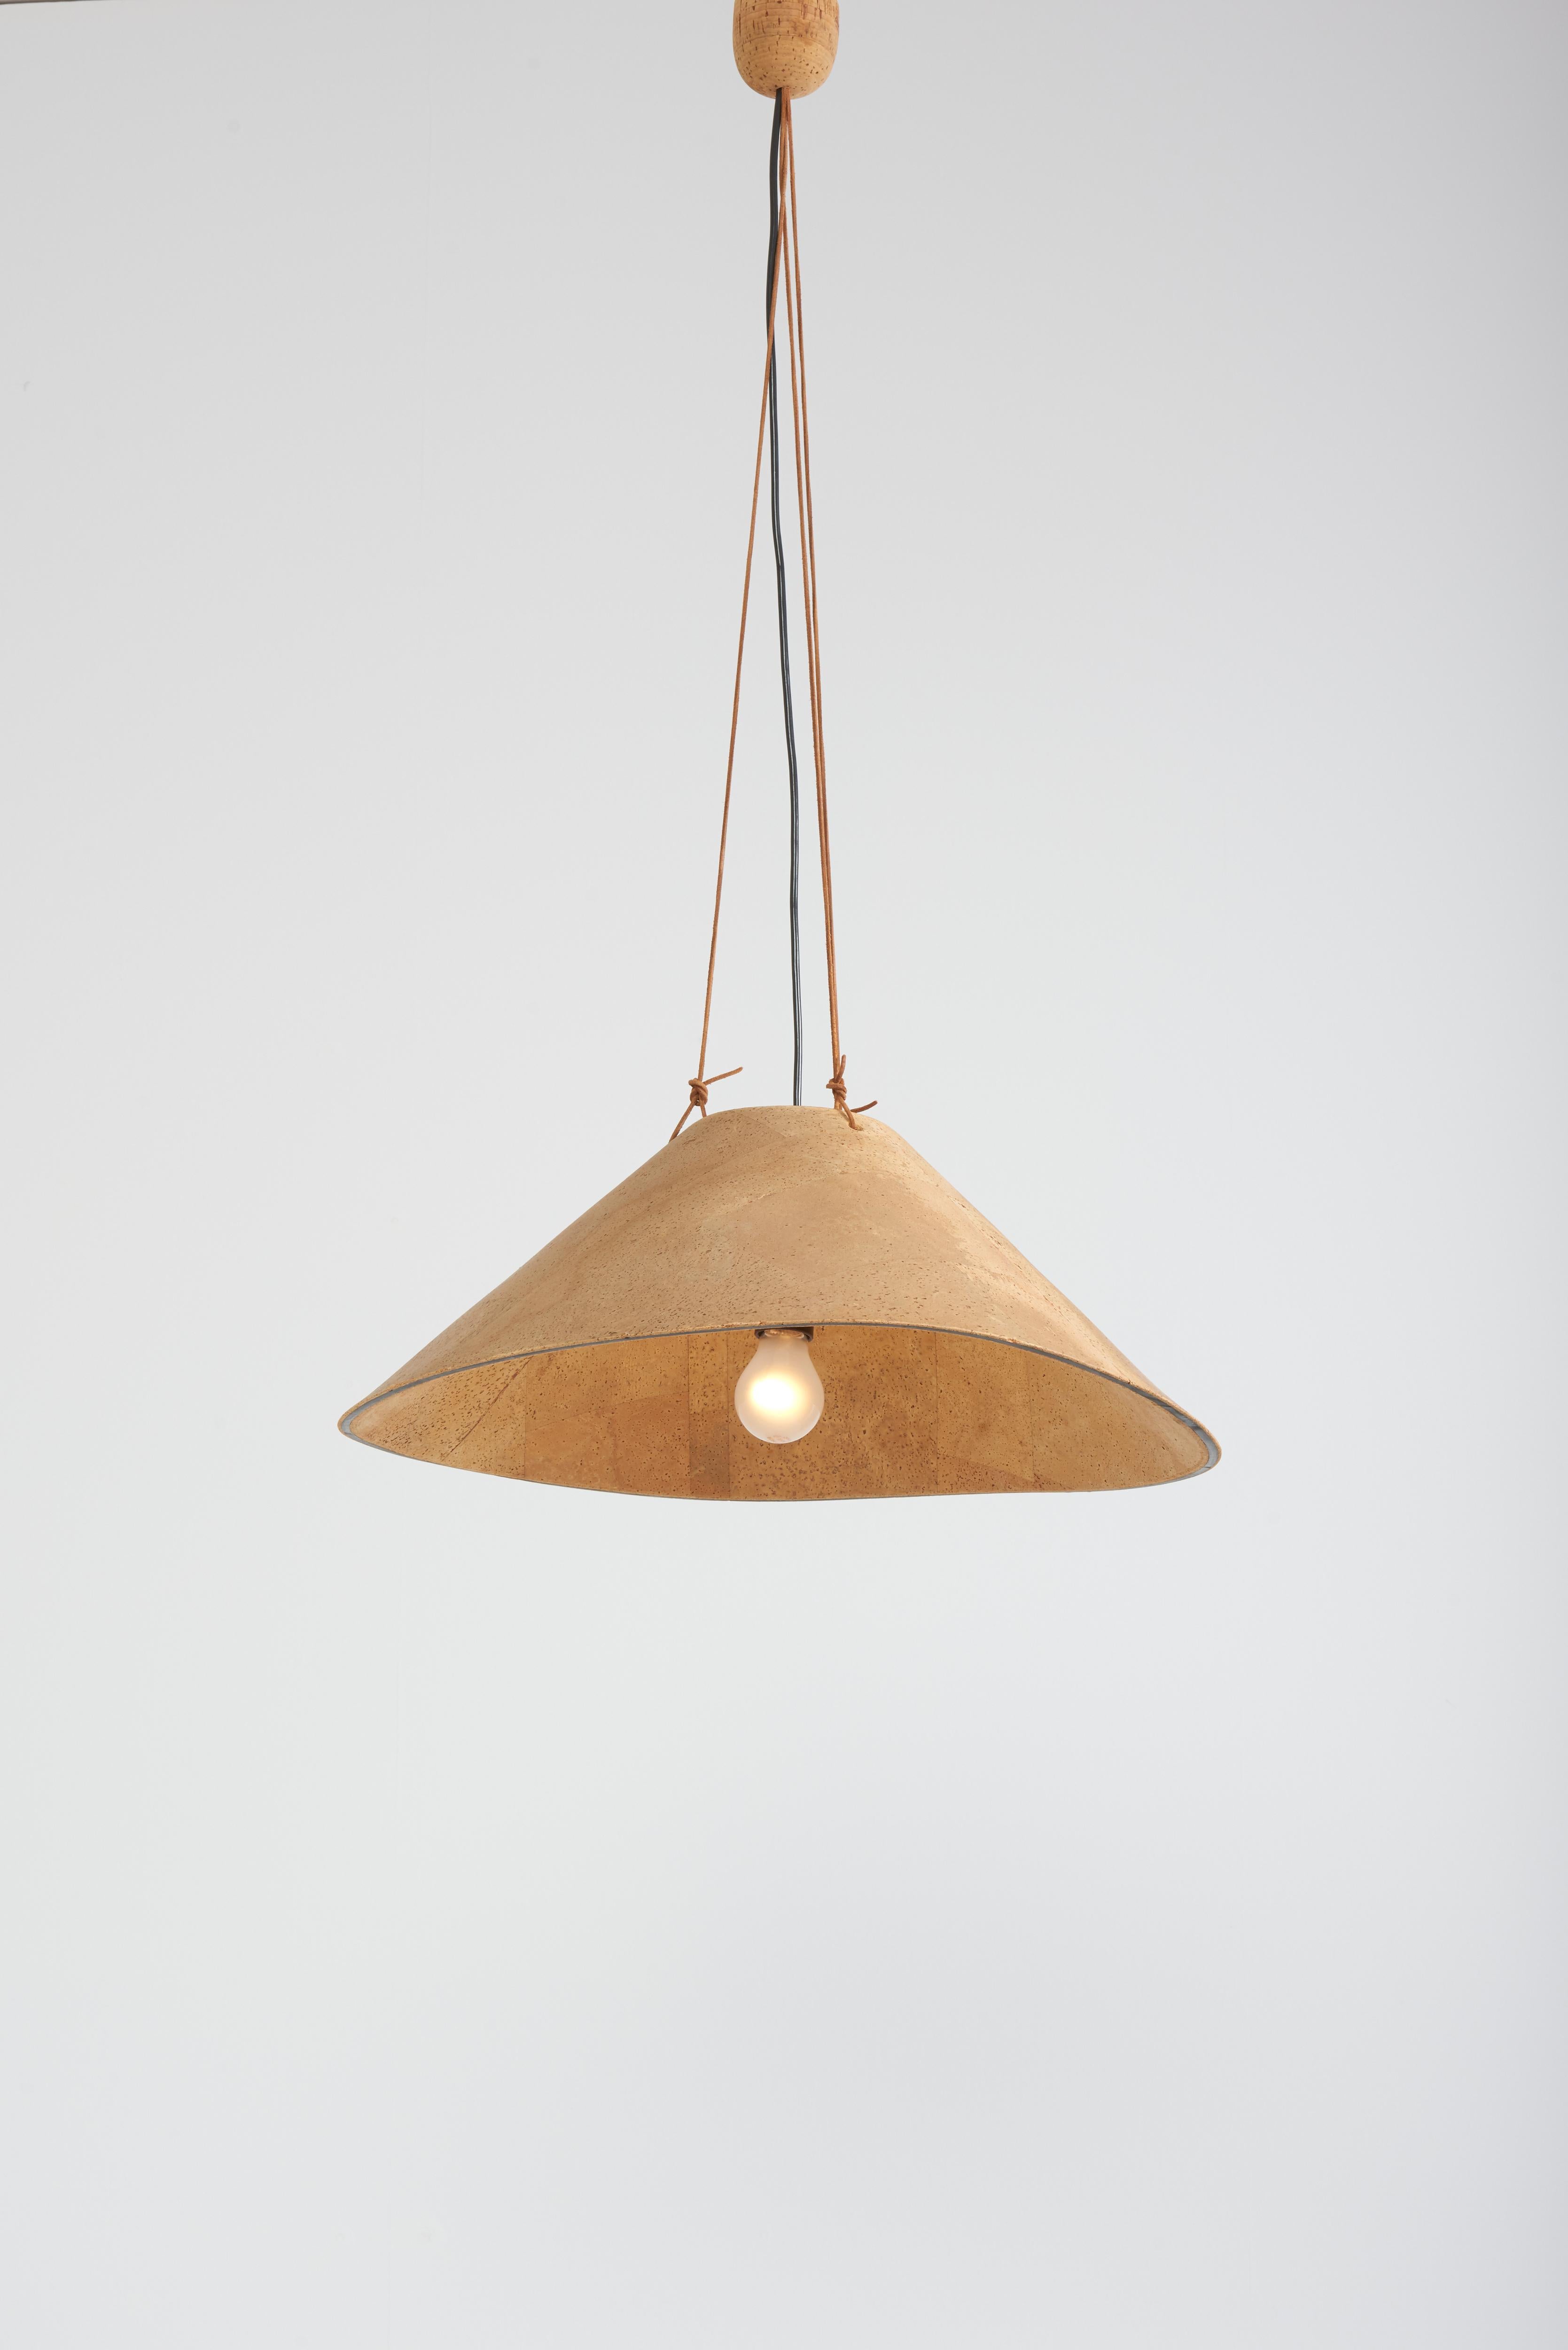 Rare pendant lamp in cork with leather strings by Wilhelm Zannoth for Ingo Maurer.
1 x E27 bulb.

To be on the safe side, the lamp should be checked locally by a specialist concerning local requirements.